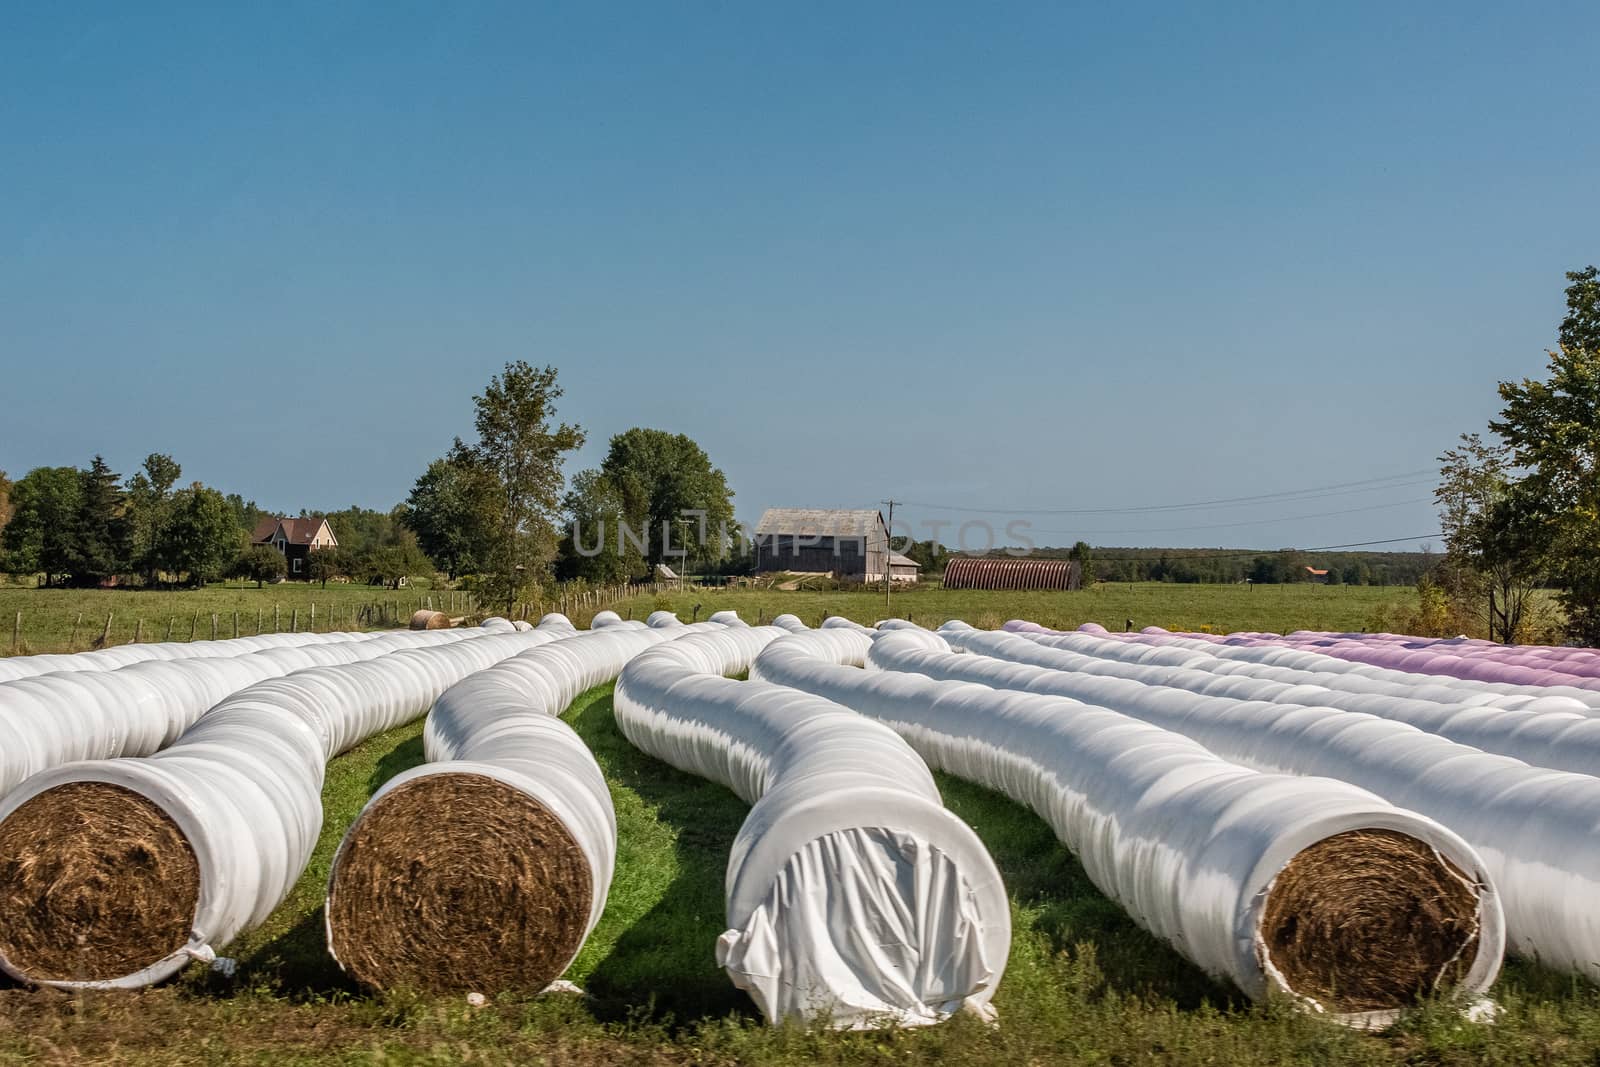 The  farmer neatly packed the hay into rolls  by ben44